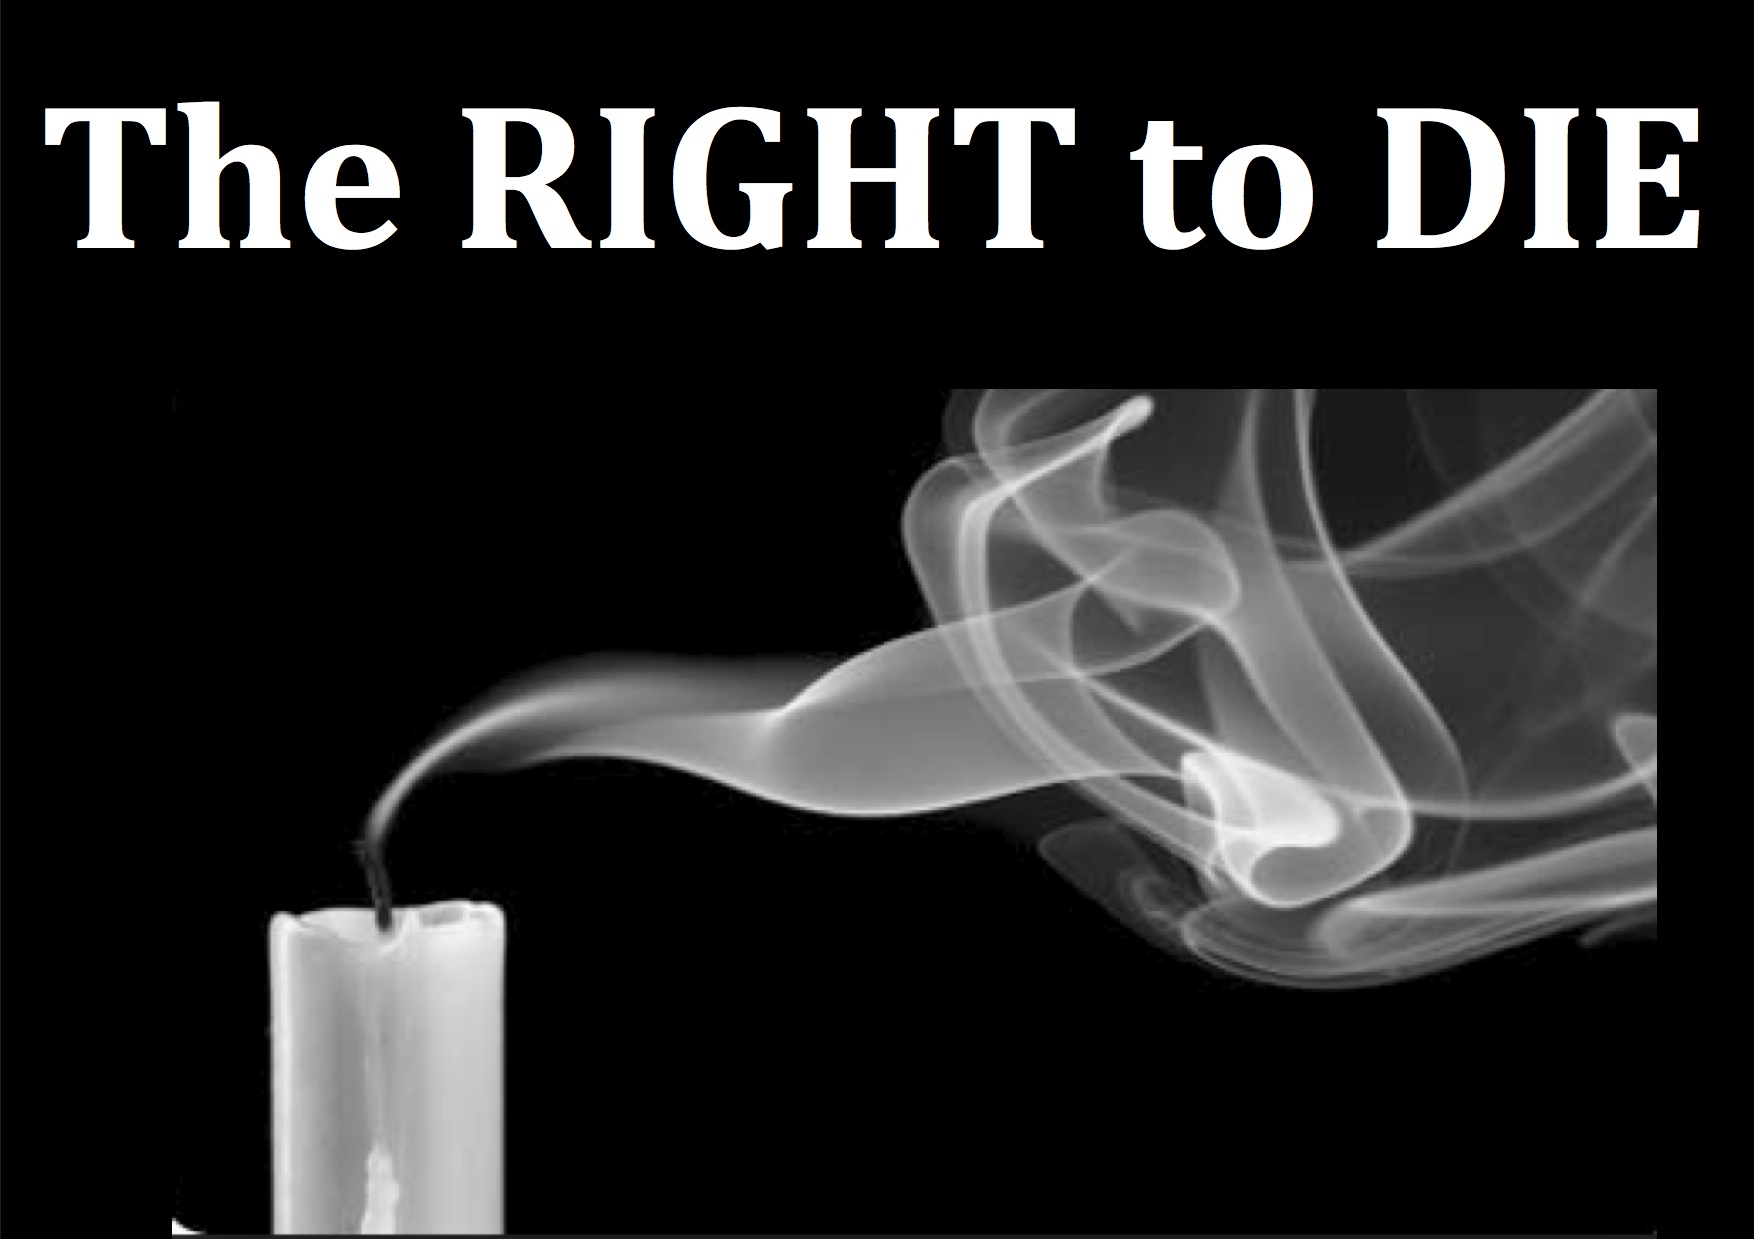 Right to die with dignity - iPleaders